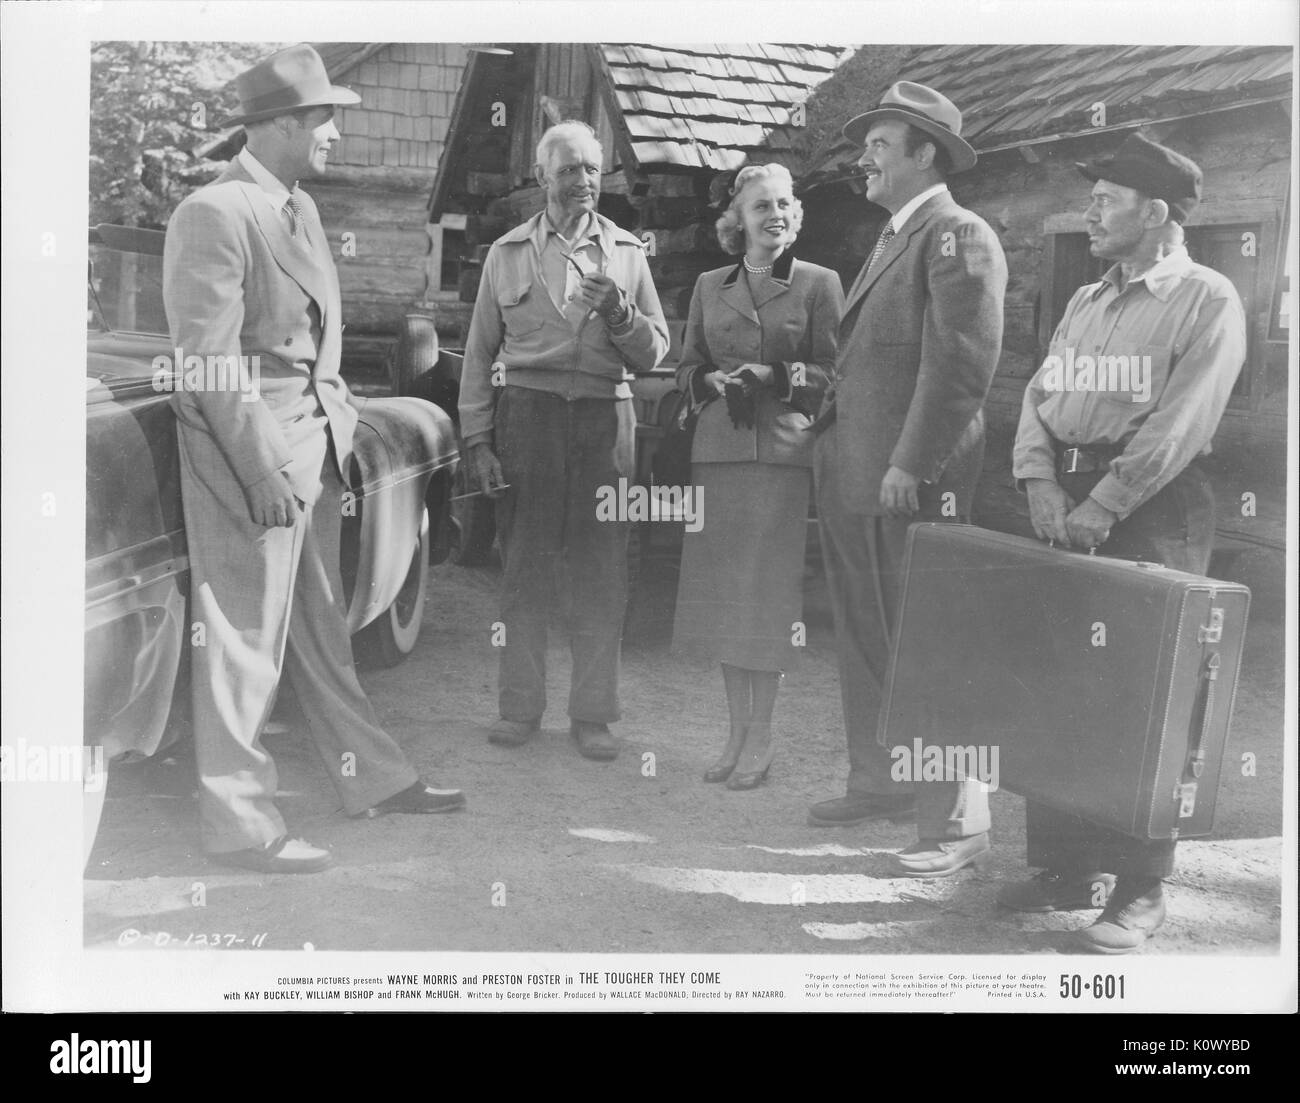 A movie still scene from 'The Tougher They Come' (1950 Columbia Pictures film), showing five adults standing outside a house, four men and a lady, amiably discussing matters of import, 1950. Stock Photo